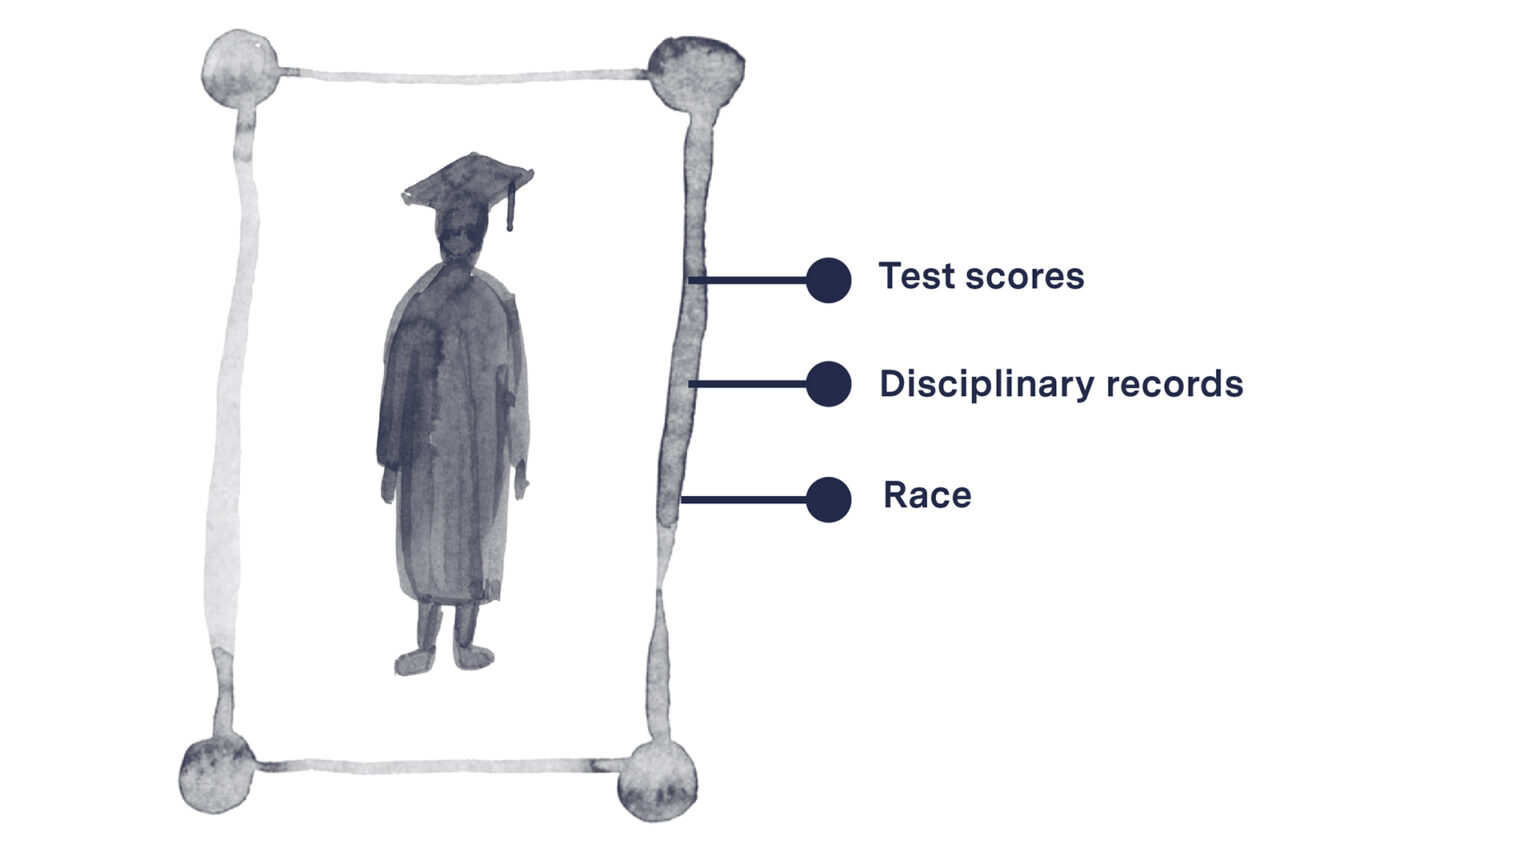 An illustration shows the outline of person wearing a graduation gown and cap in a box with three connected bullet points reading Test scores, Disciplinary records, and Race.